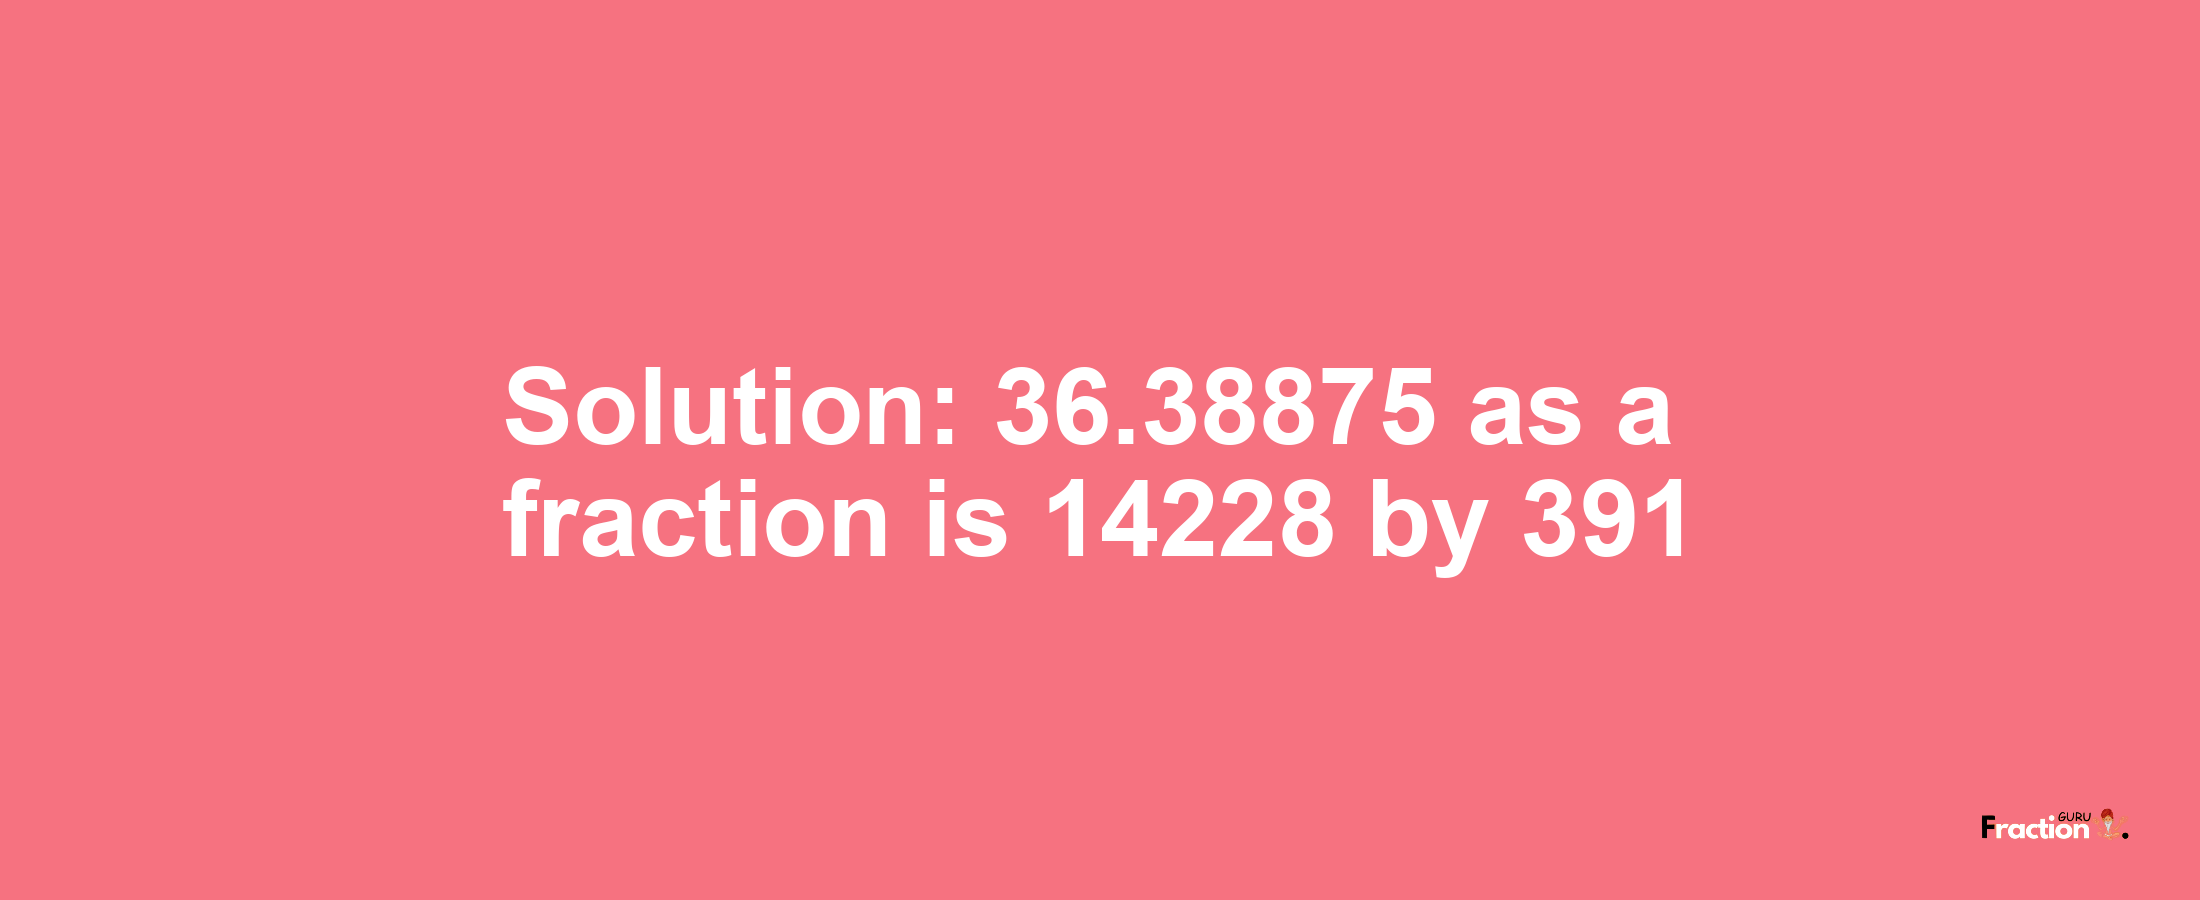 Solution:36.38875 as a fraction is 14228/391